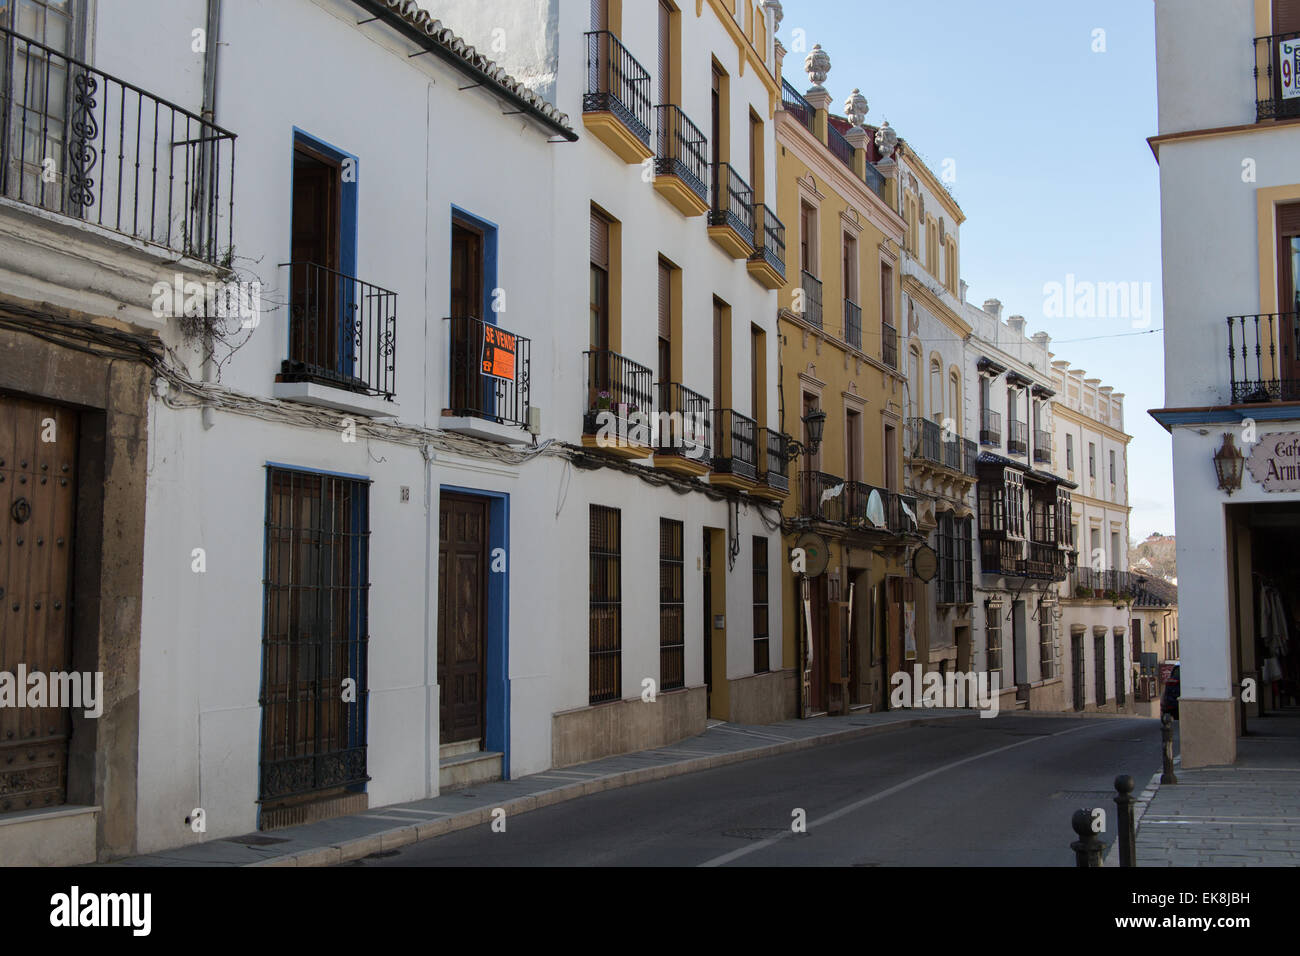 Typical street scene of Spanish houses in the city of Ronda Spain Stock Photo